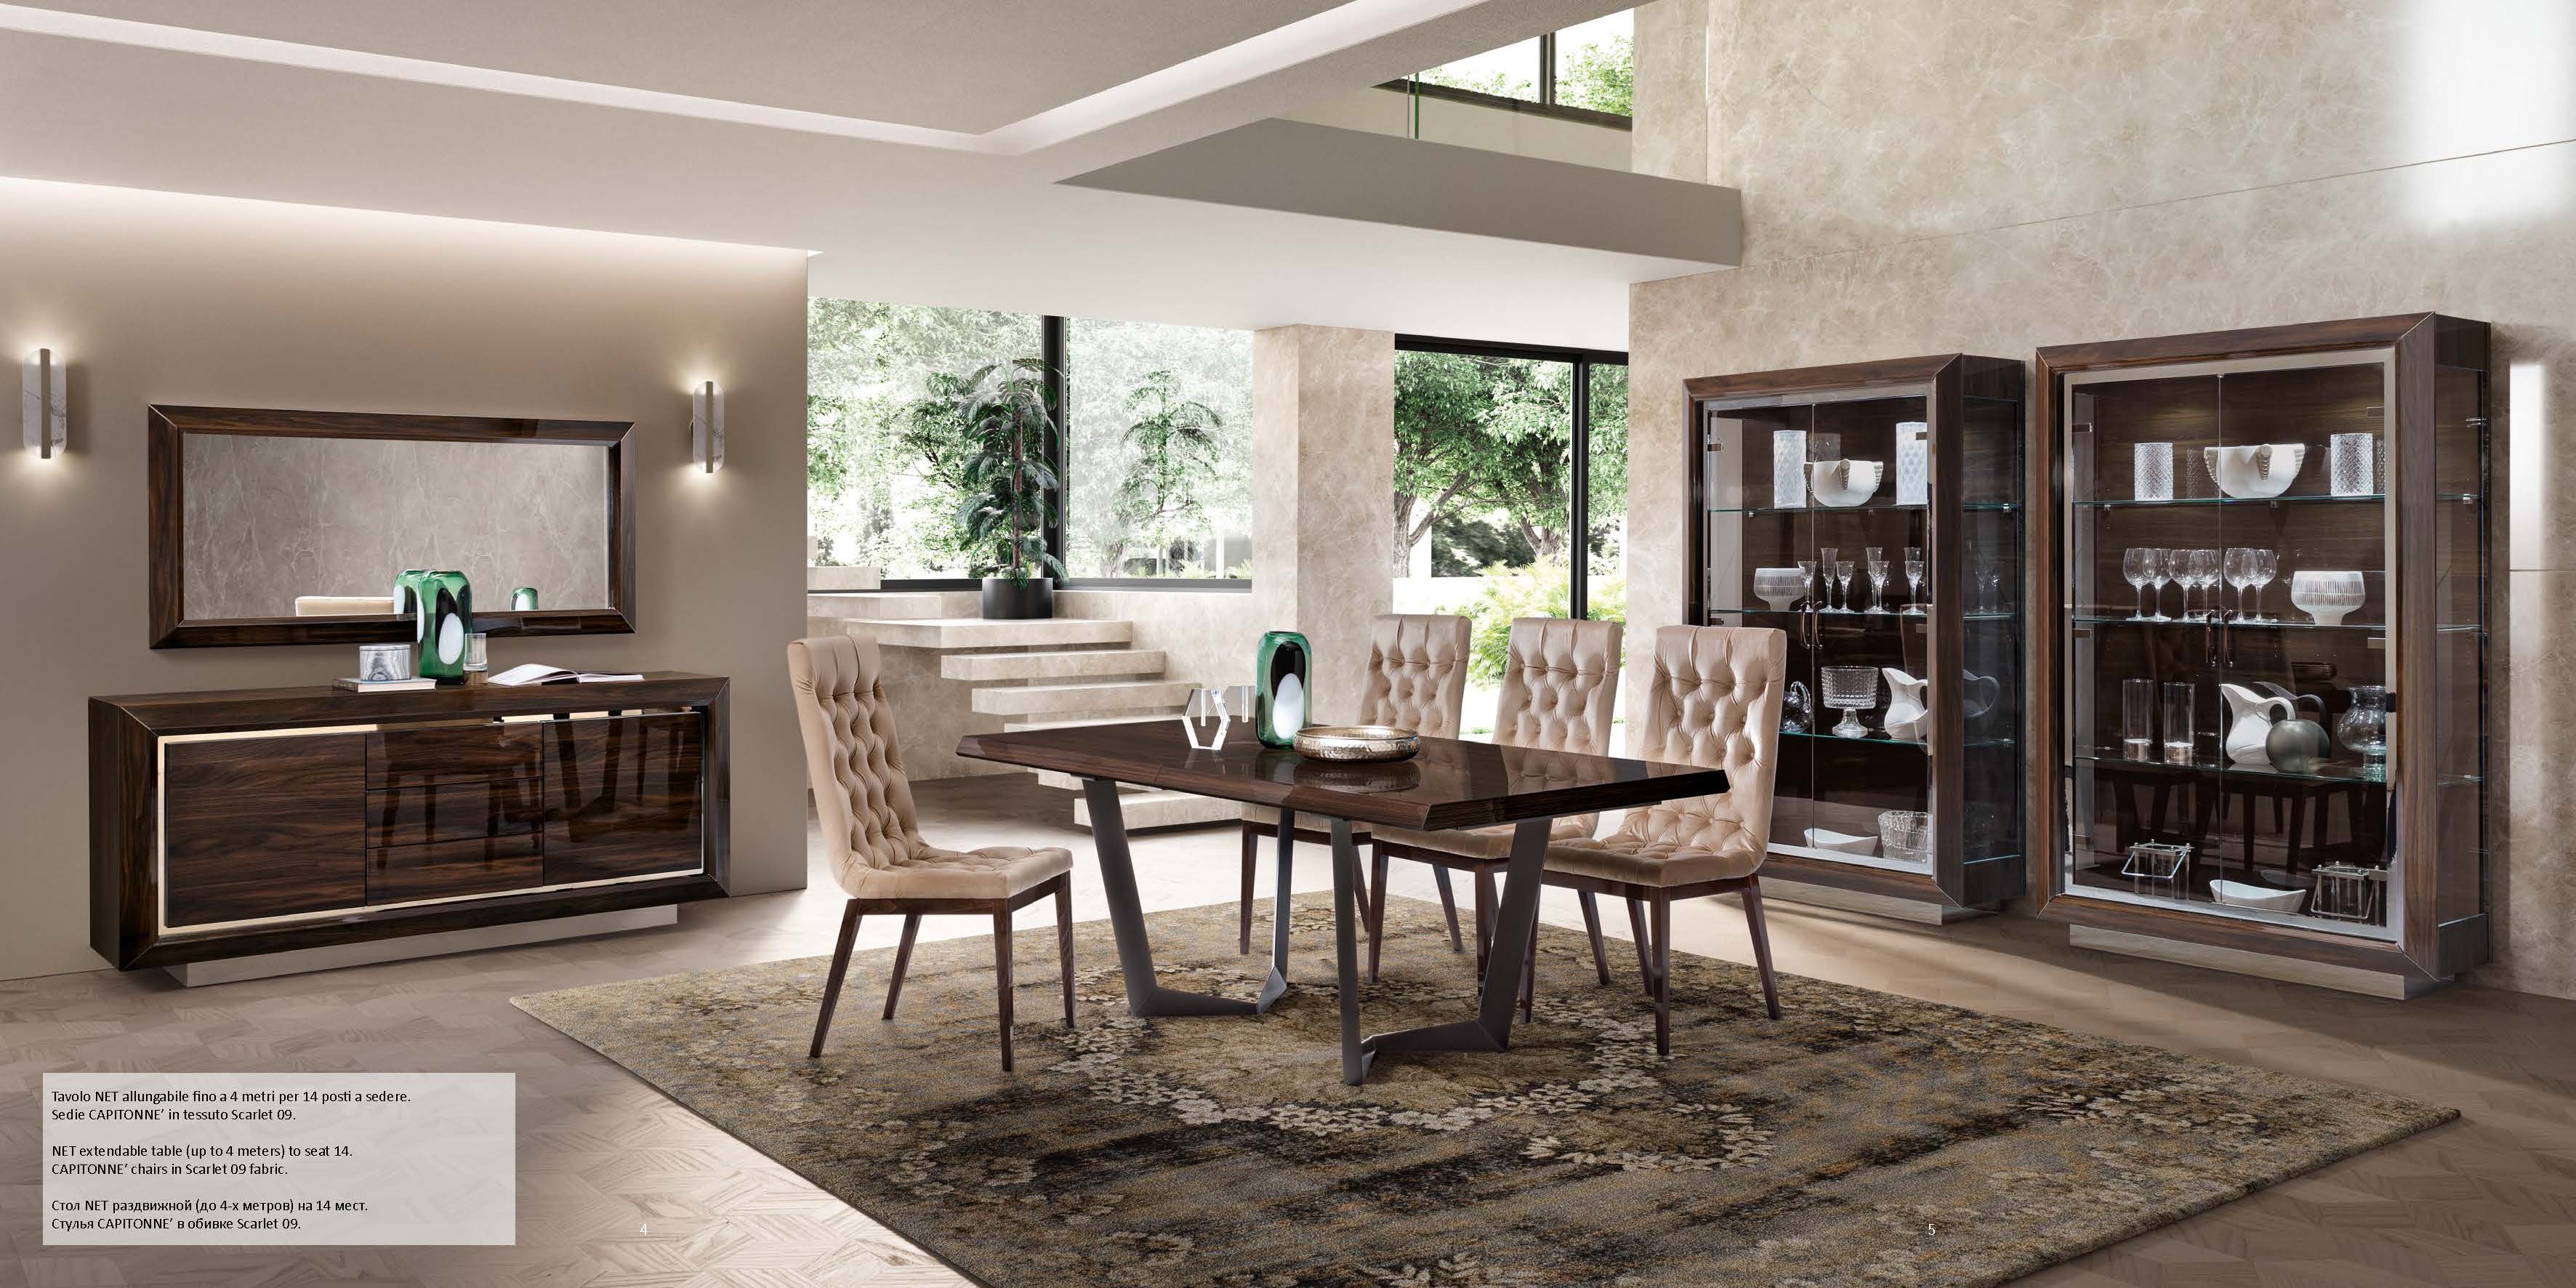 Dining Room Furniture China Cabinets and Buffets Elite Day Walnut Dining Additional items